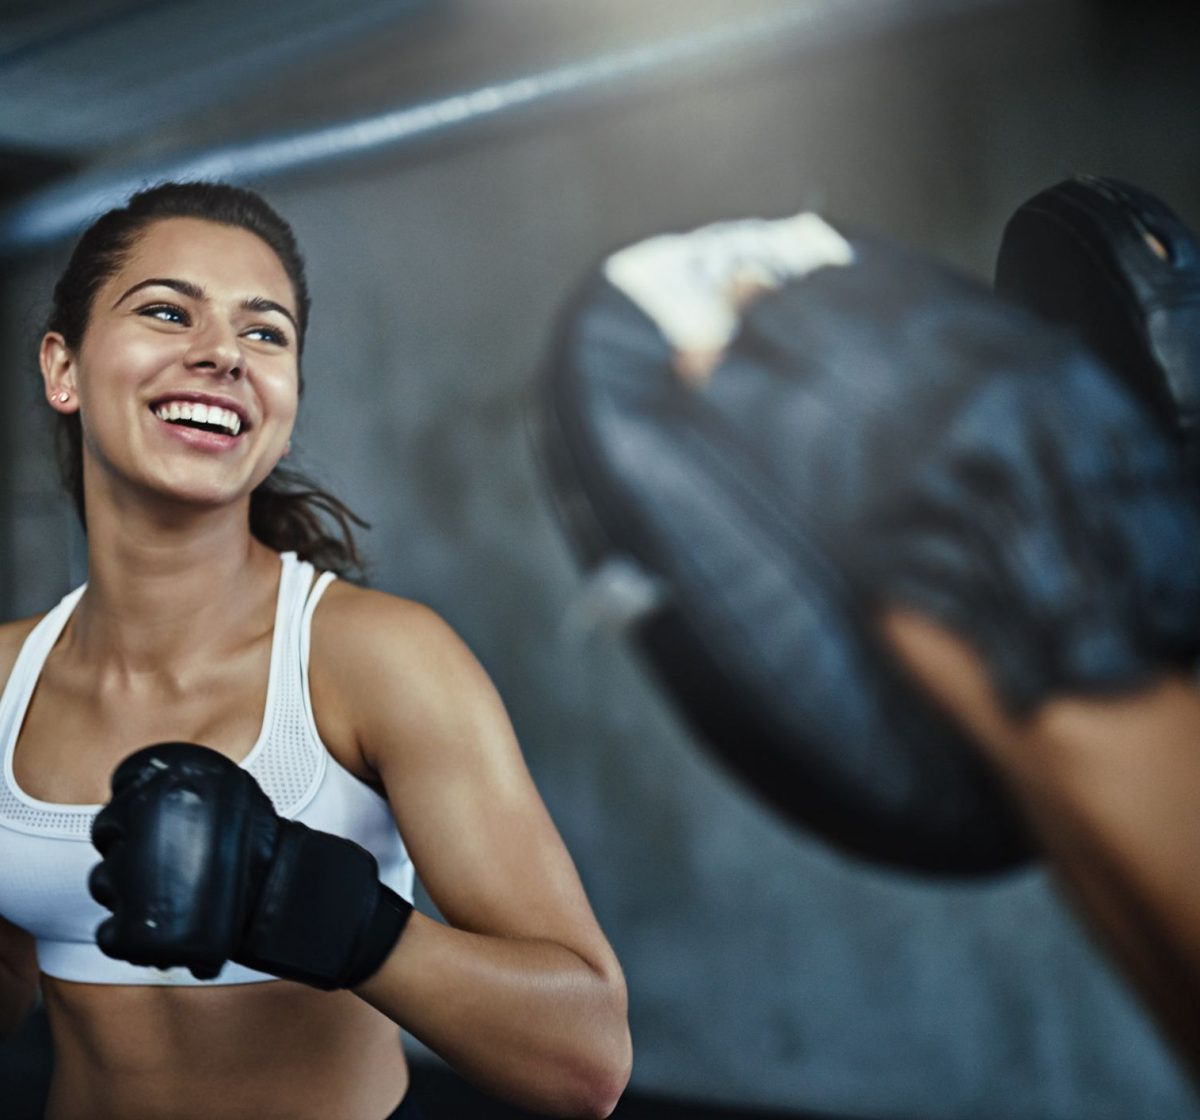 boxing-her-way-to-a-ripper-body-royalty-free-image-618981846-1548169423